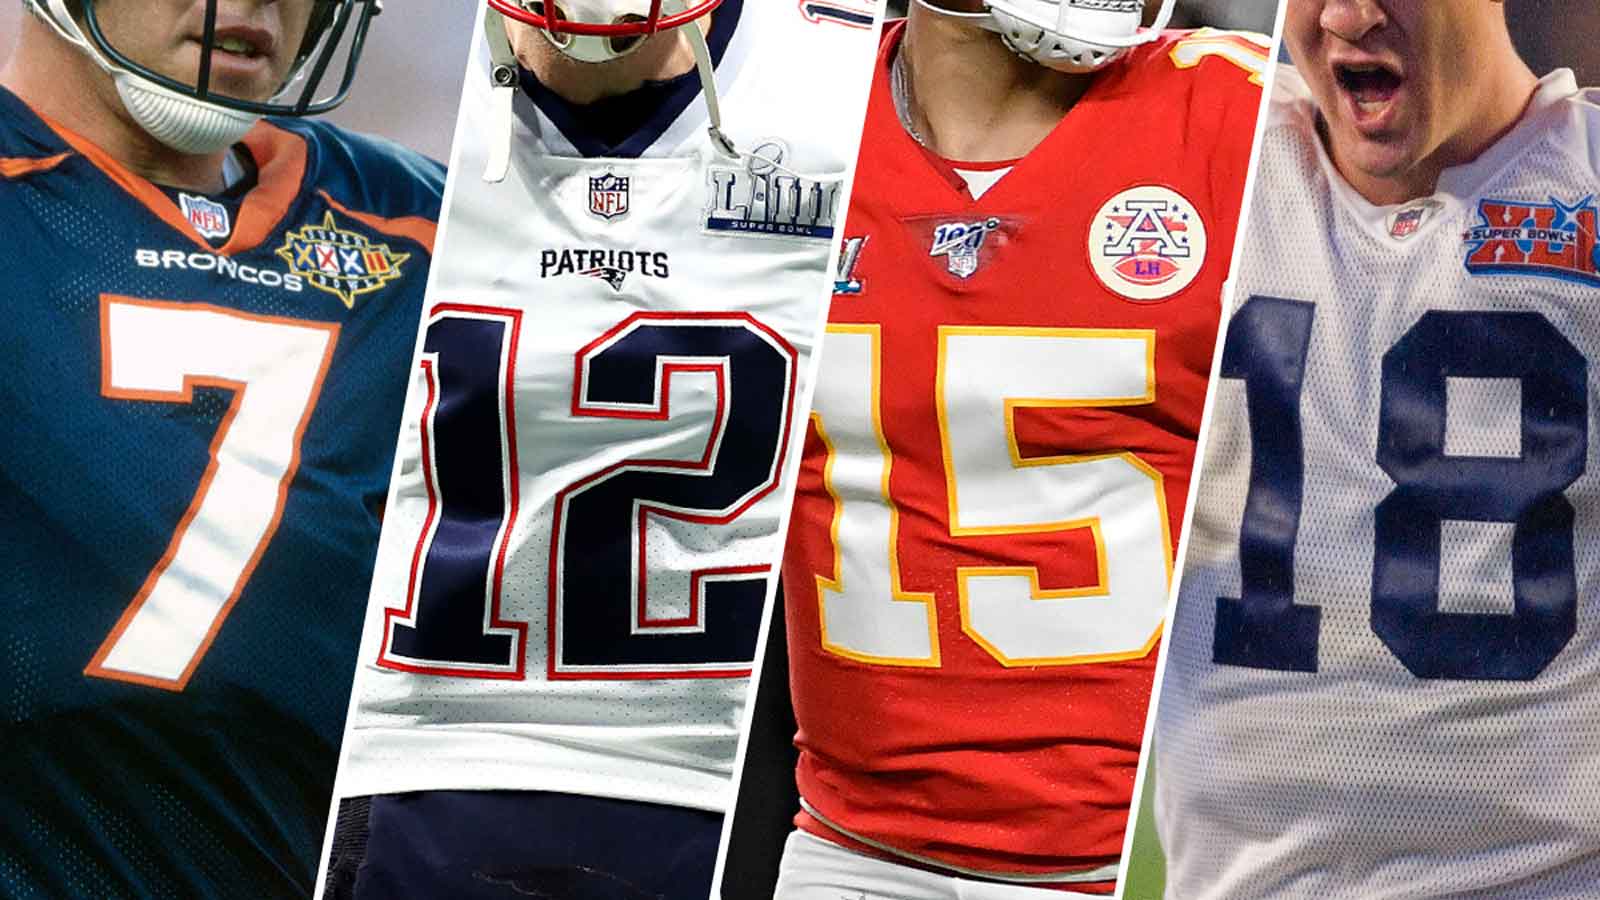 Which number was worn by the most Super Bowl-winning quarterbacks